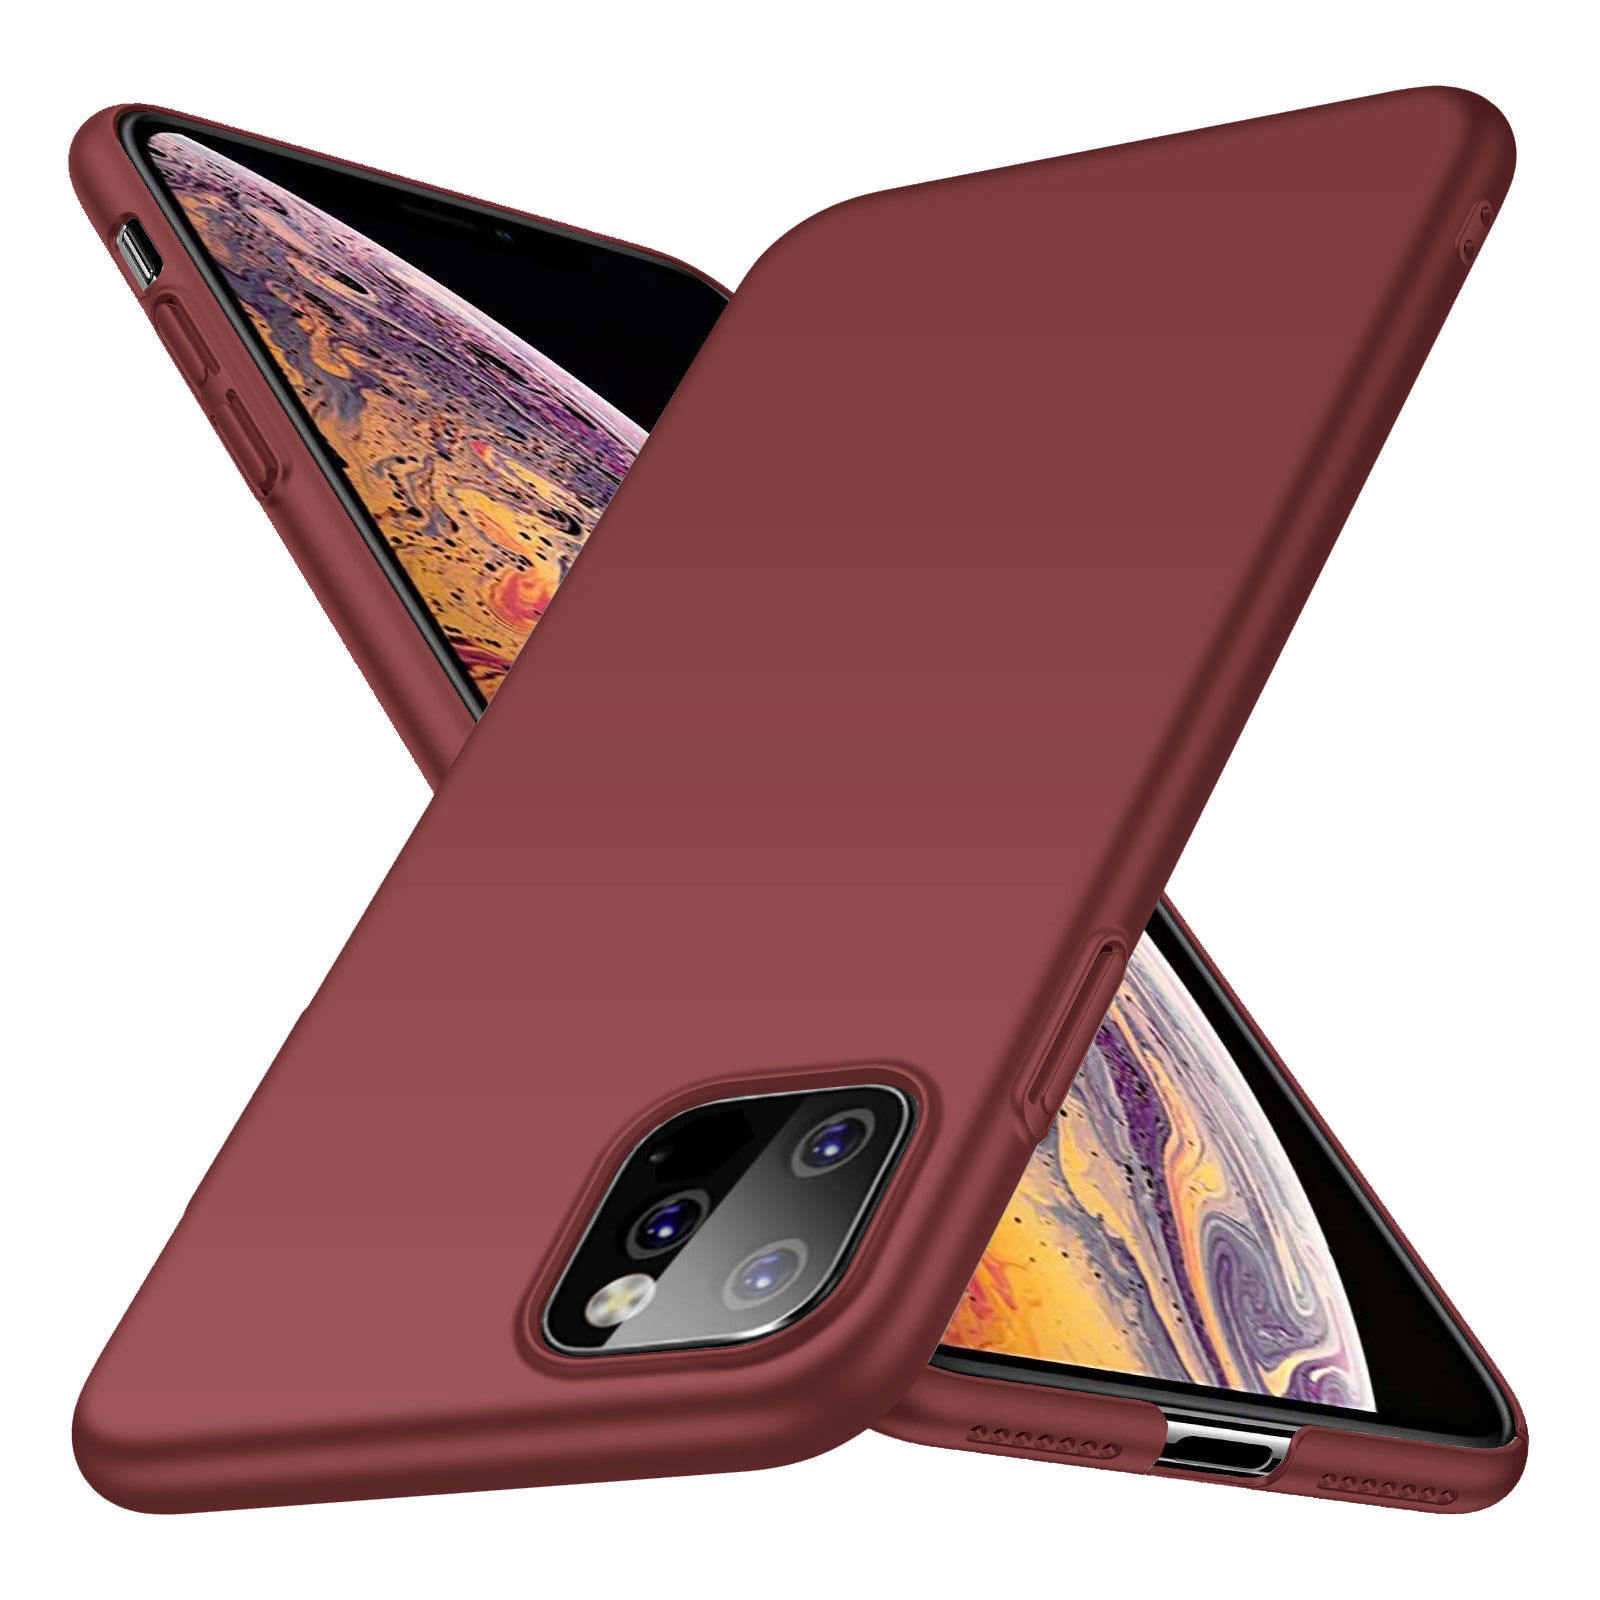 Back Case Cover Iphone 11 Pro Max Smartphone Case Burgundy Geeektech Com